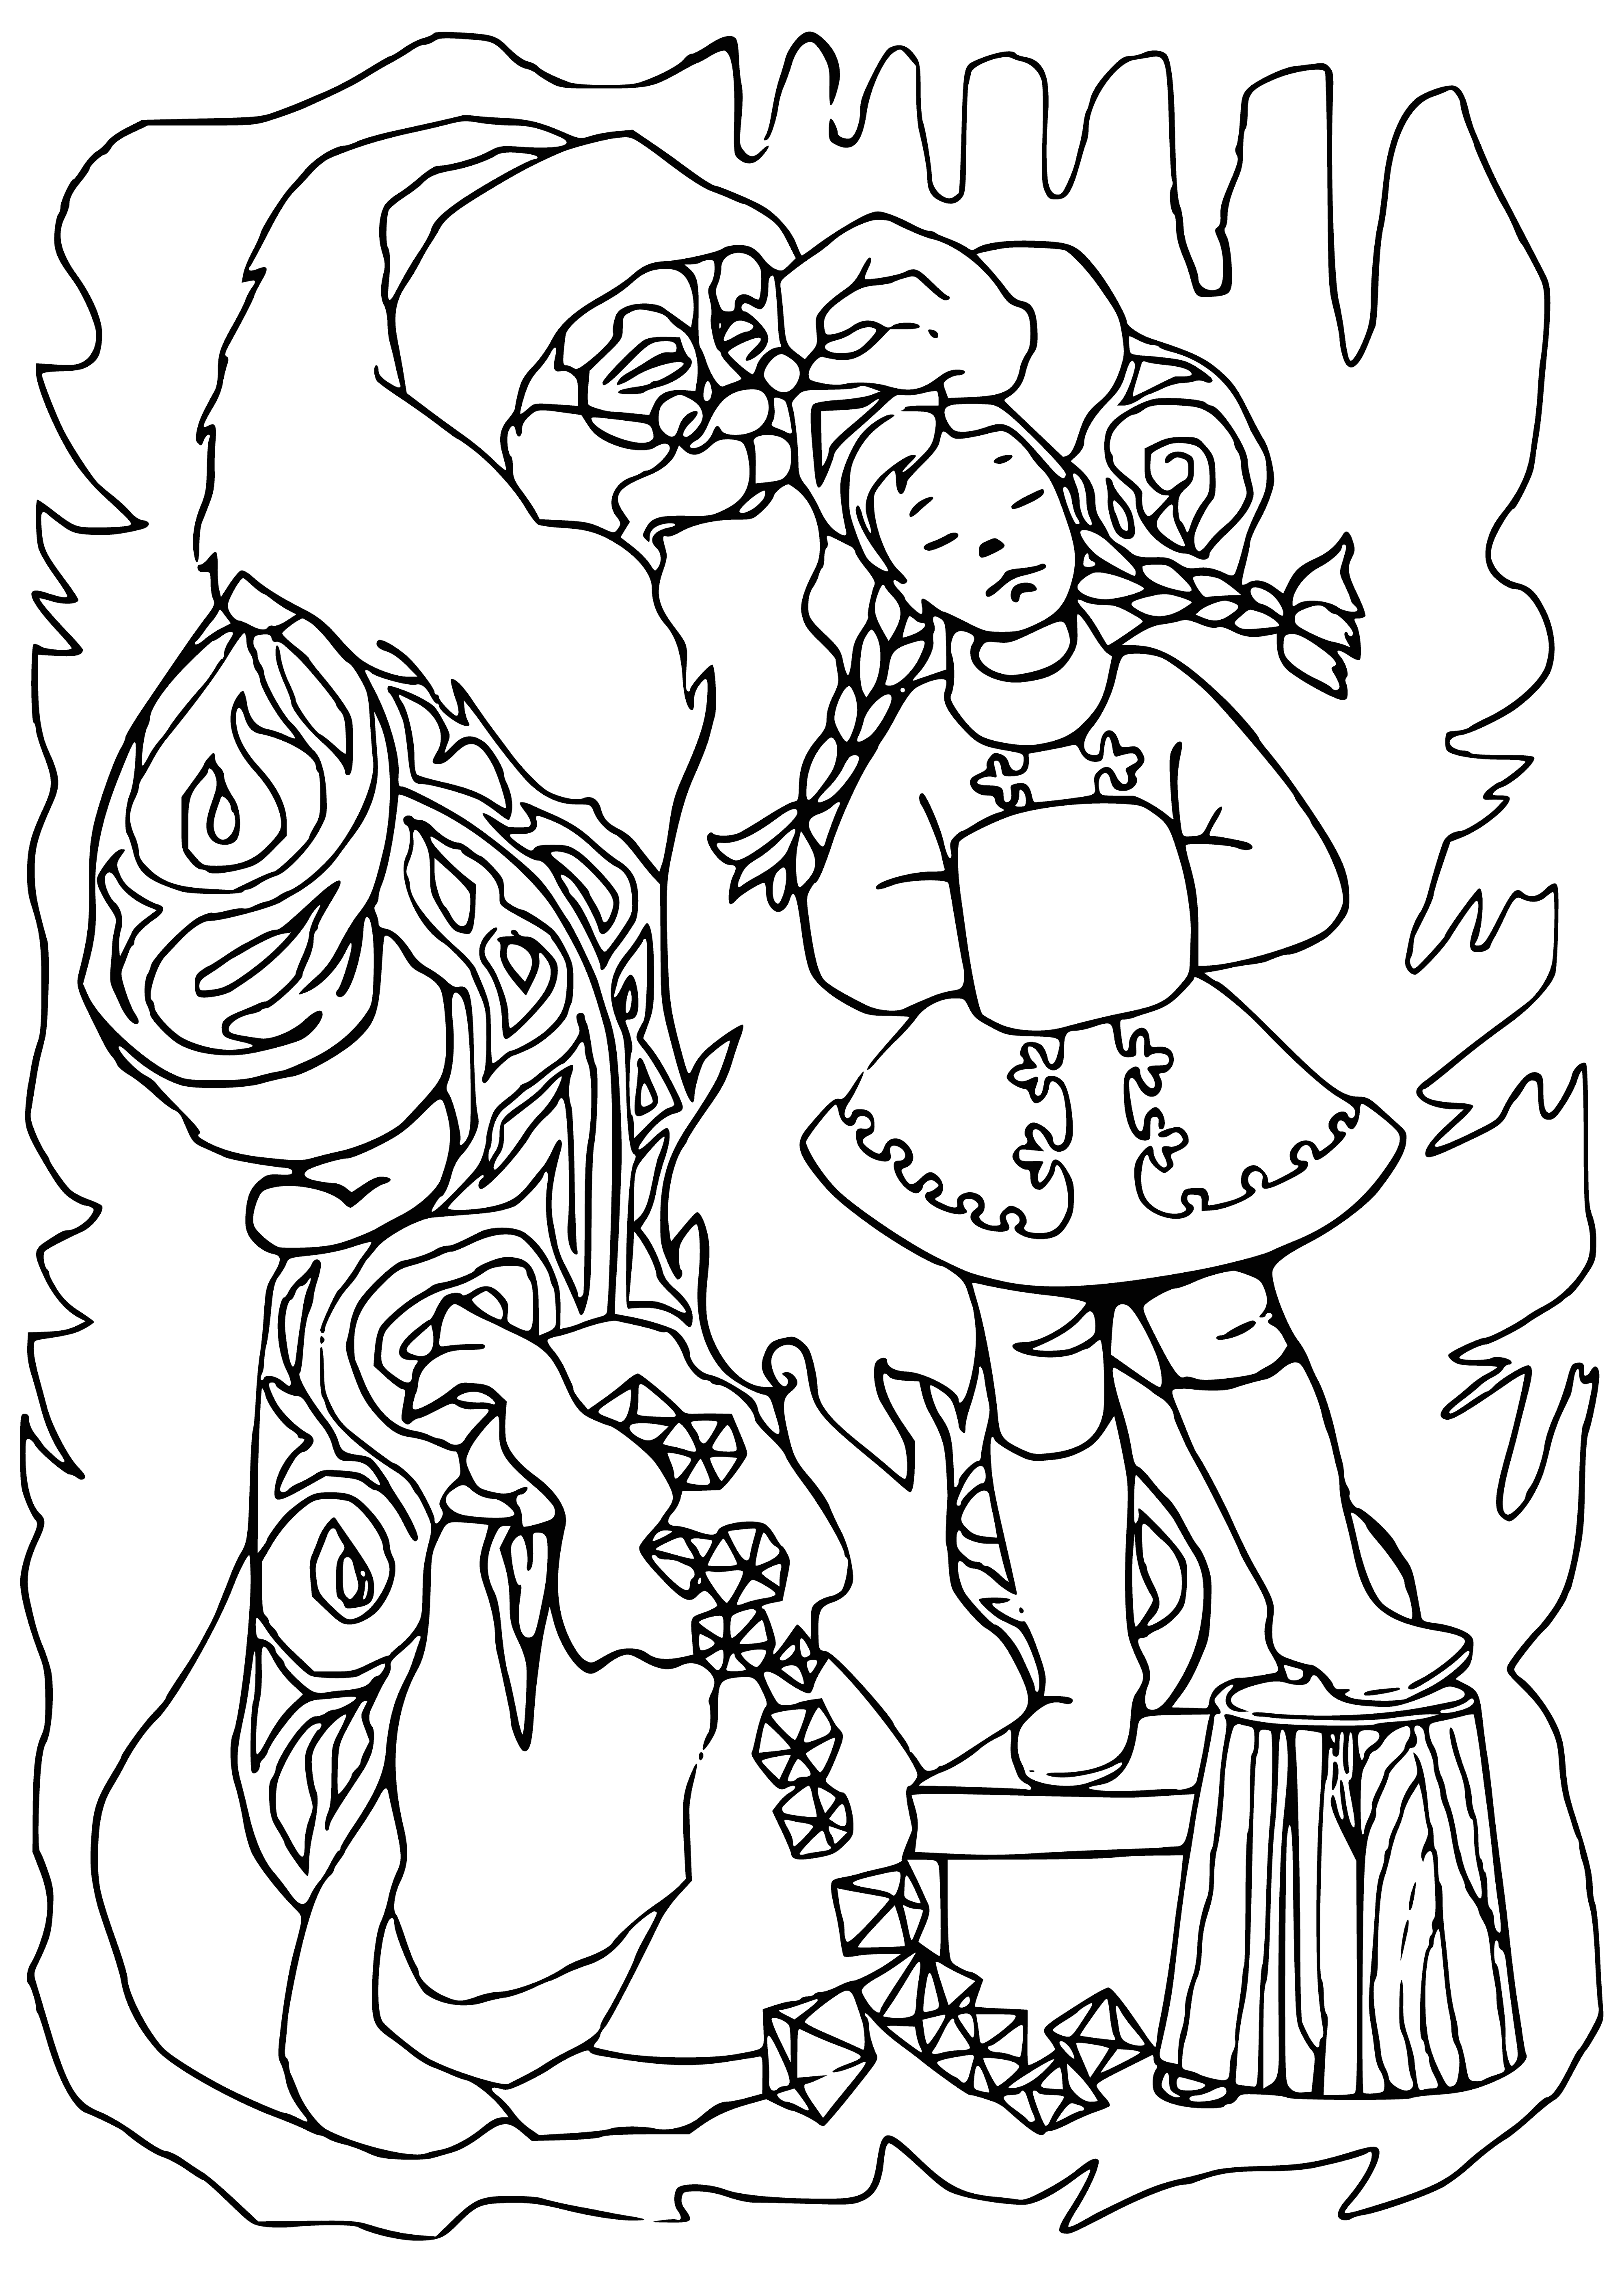 Old woman's daughter coloring page